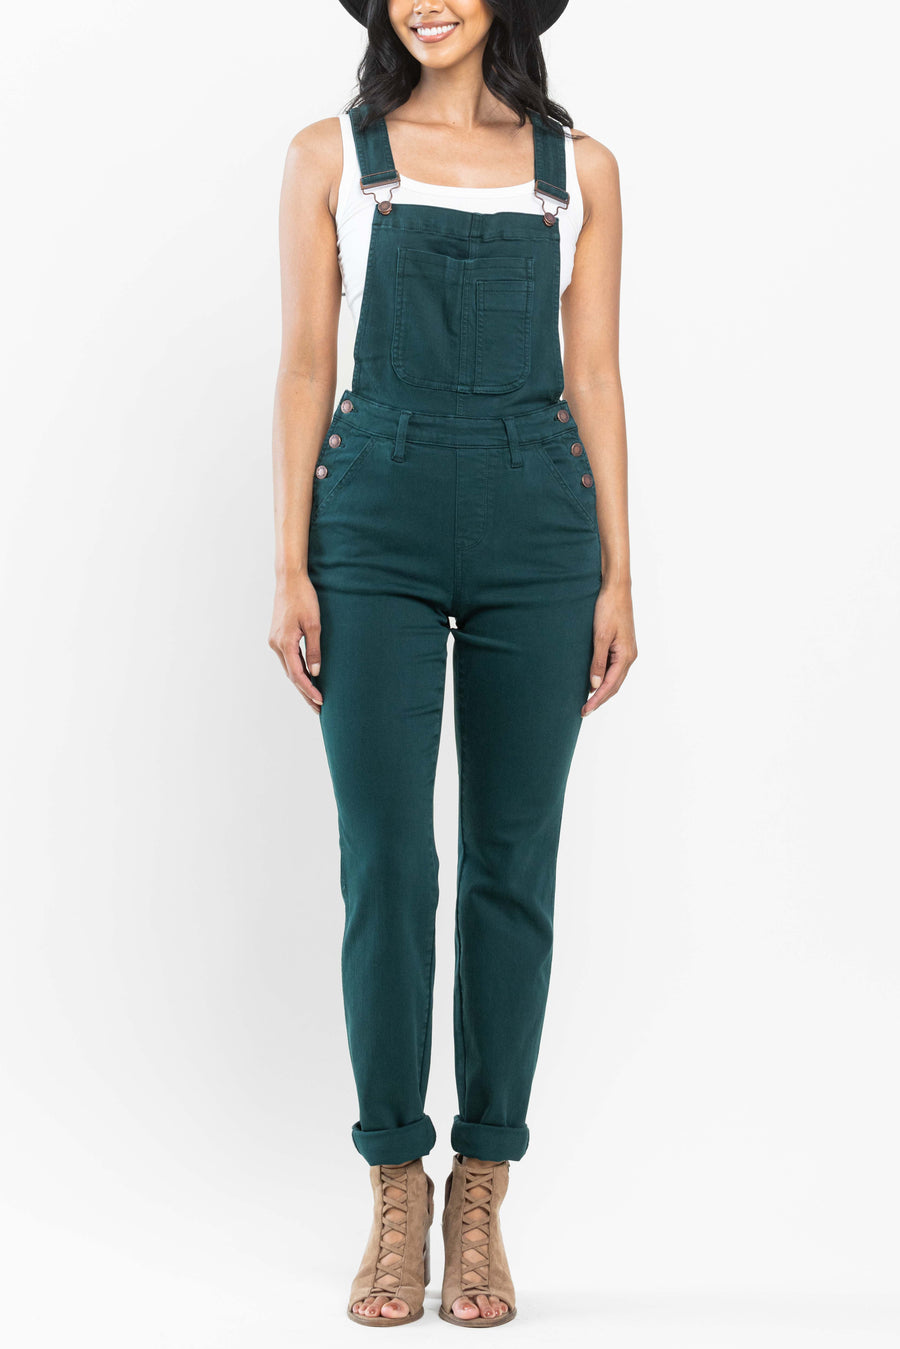 Naelly Teal Double Cuff Boyfriend Overall